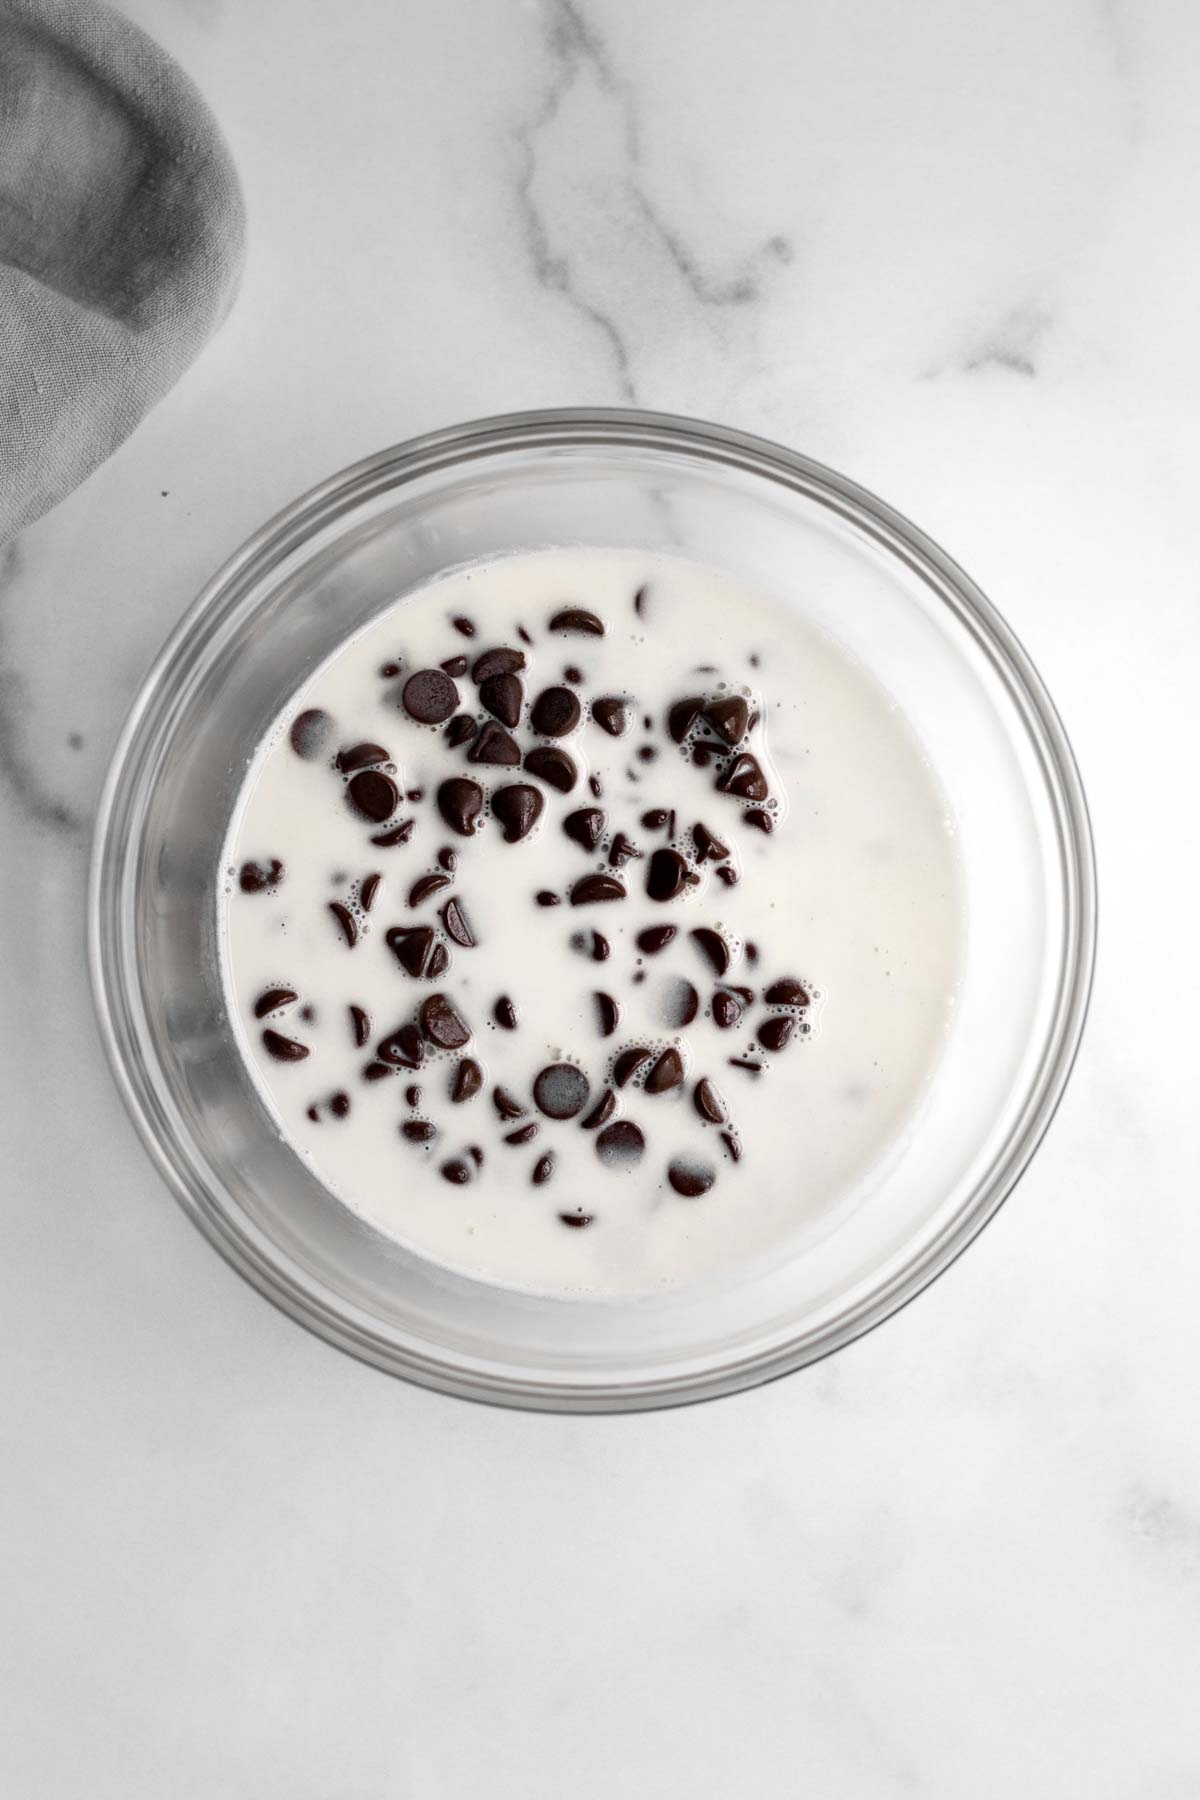 A glass bowl with milk and chocolate chips.